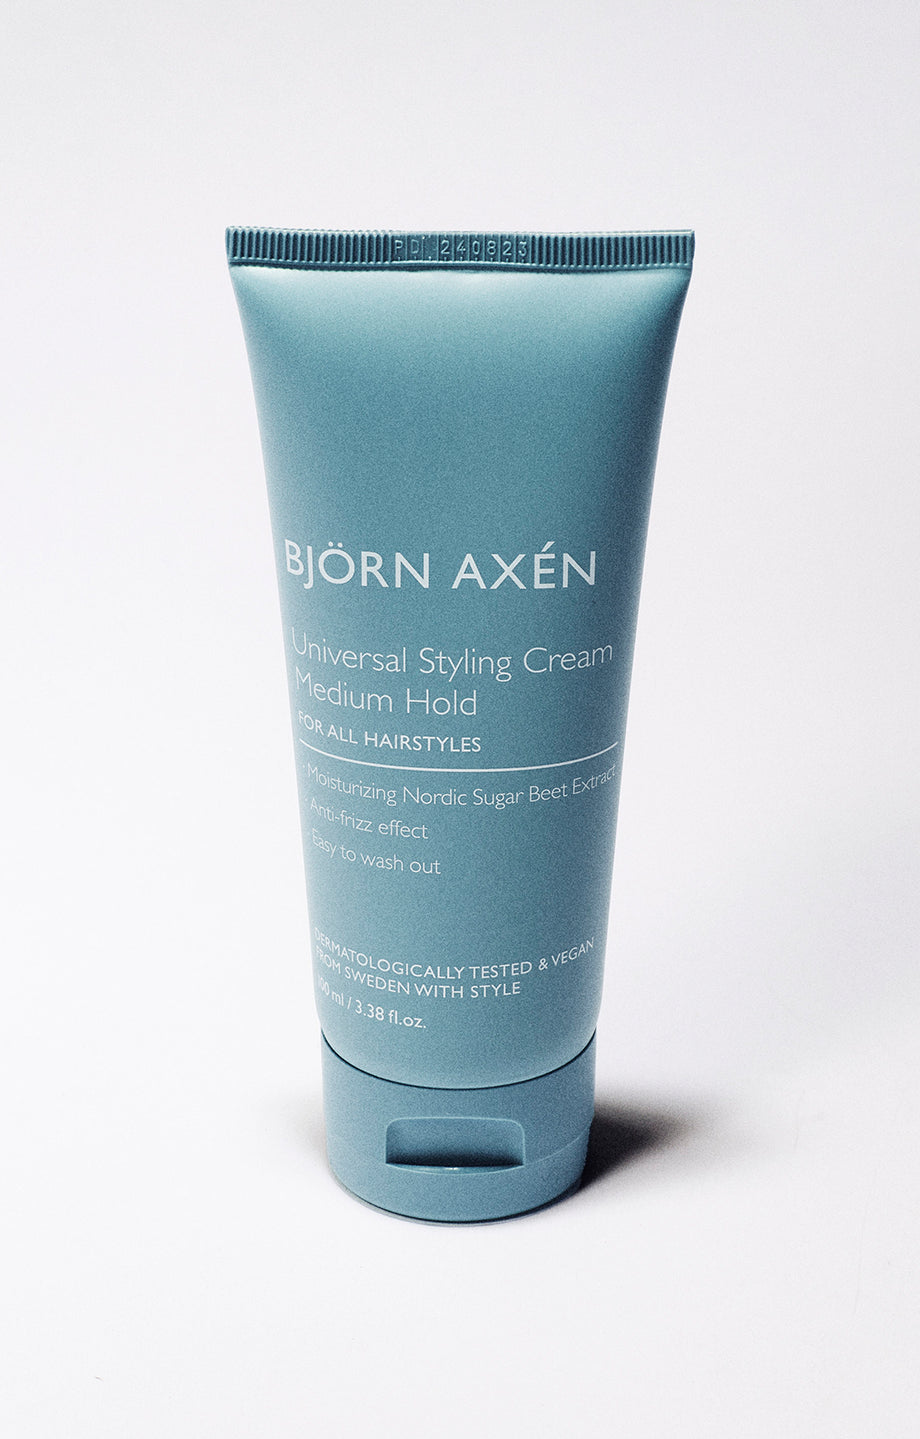 A styling cream for medium hold and volume